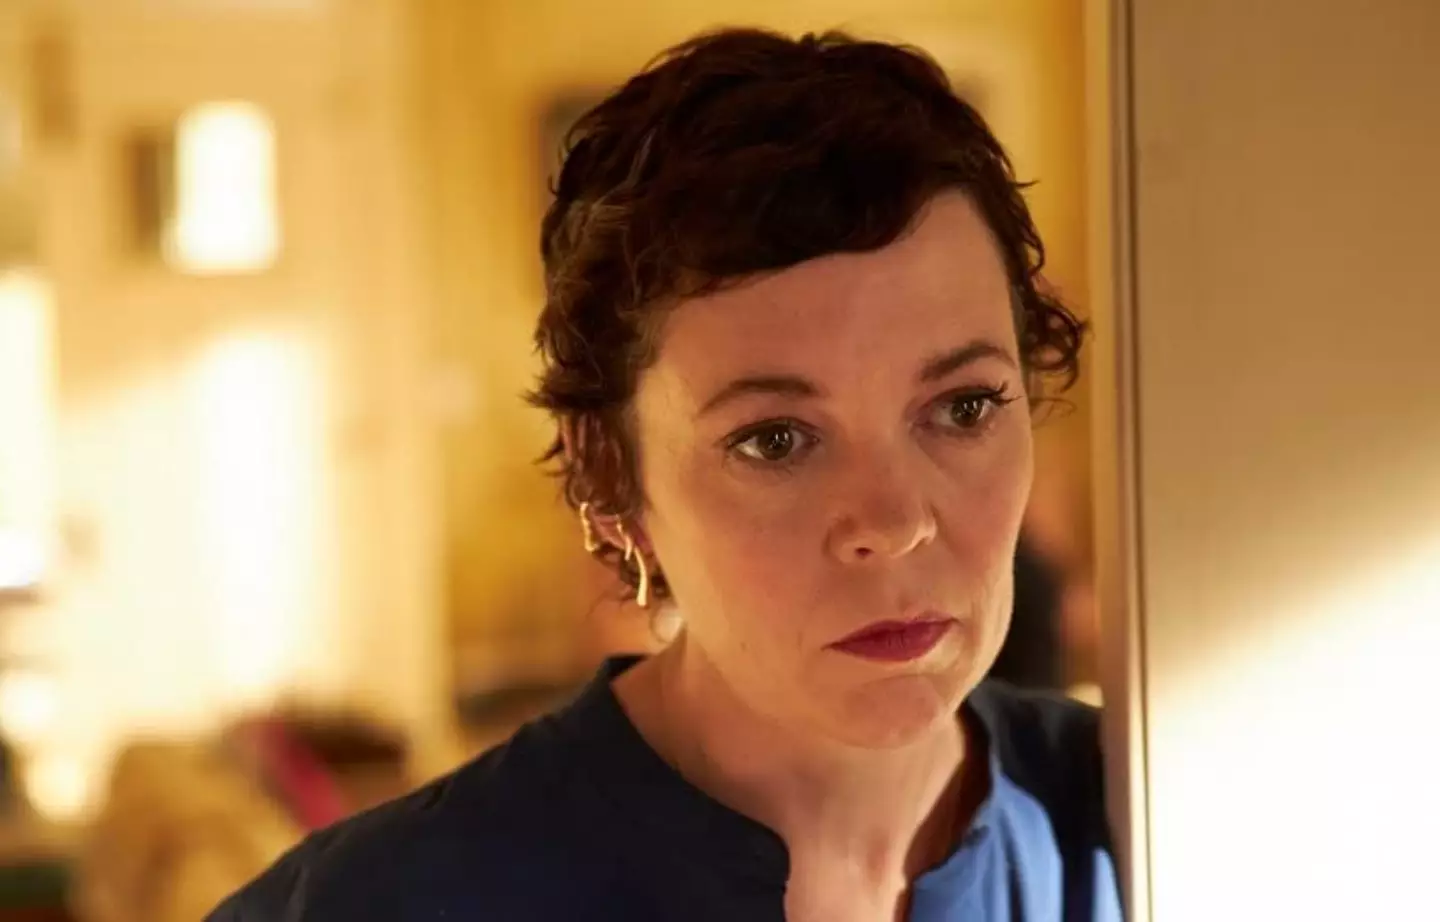 Olivia Colman portrays the role of Anthony's daughter, Anne.